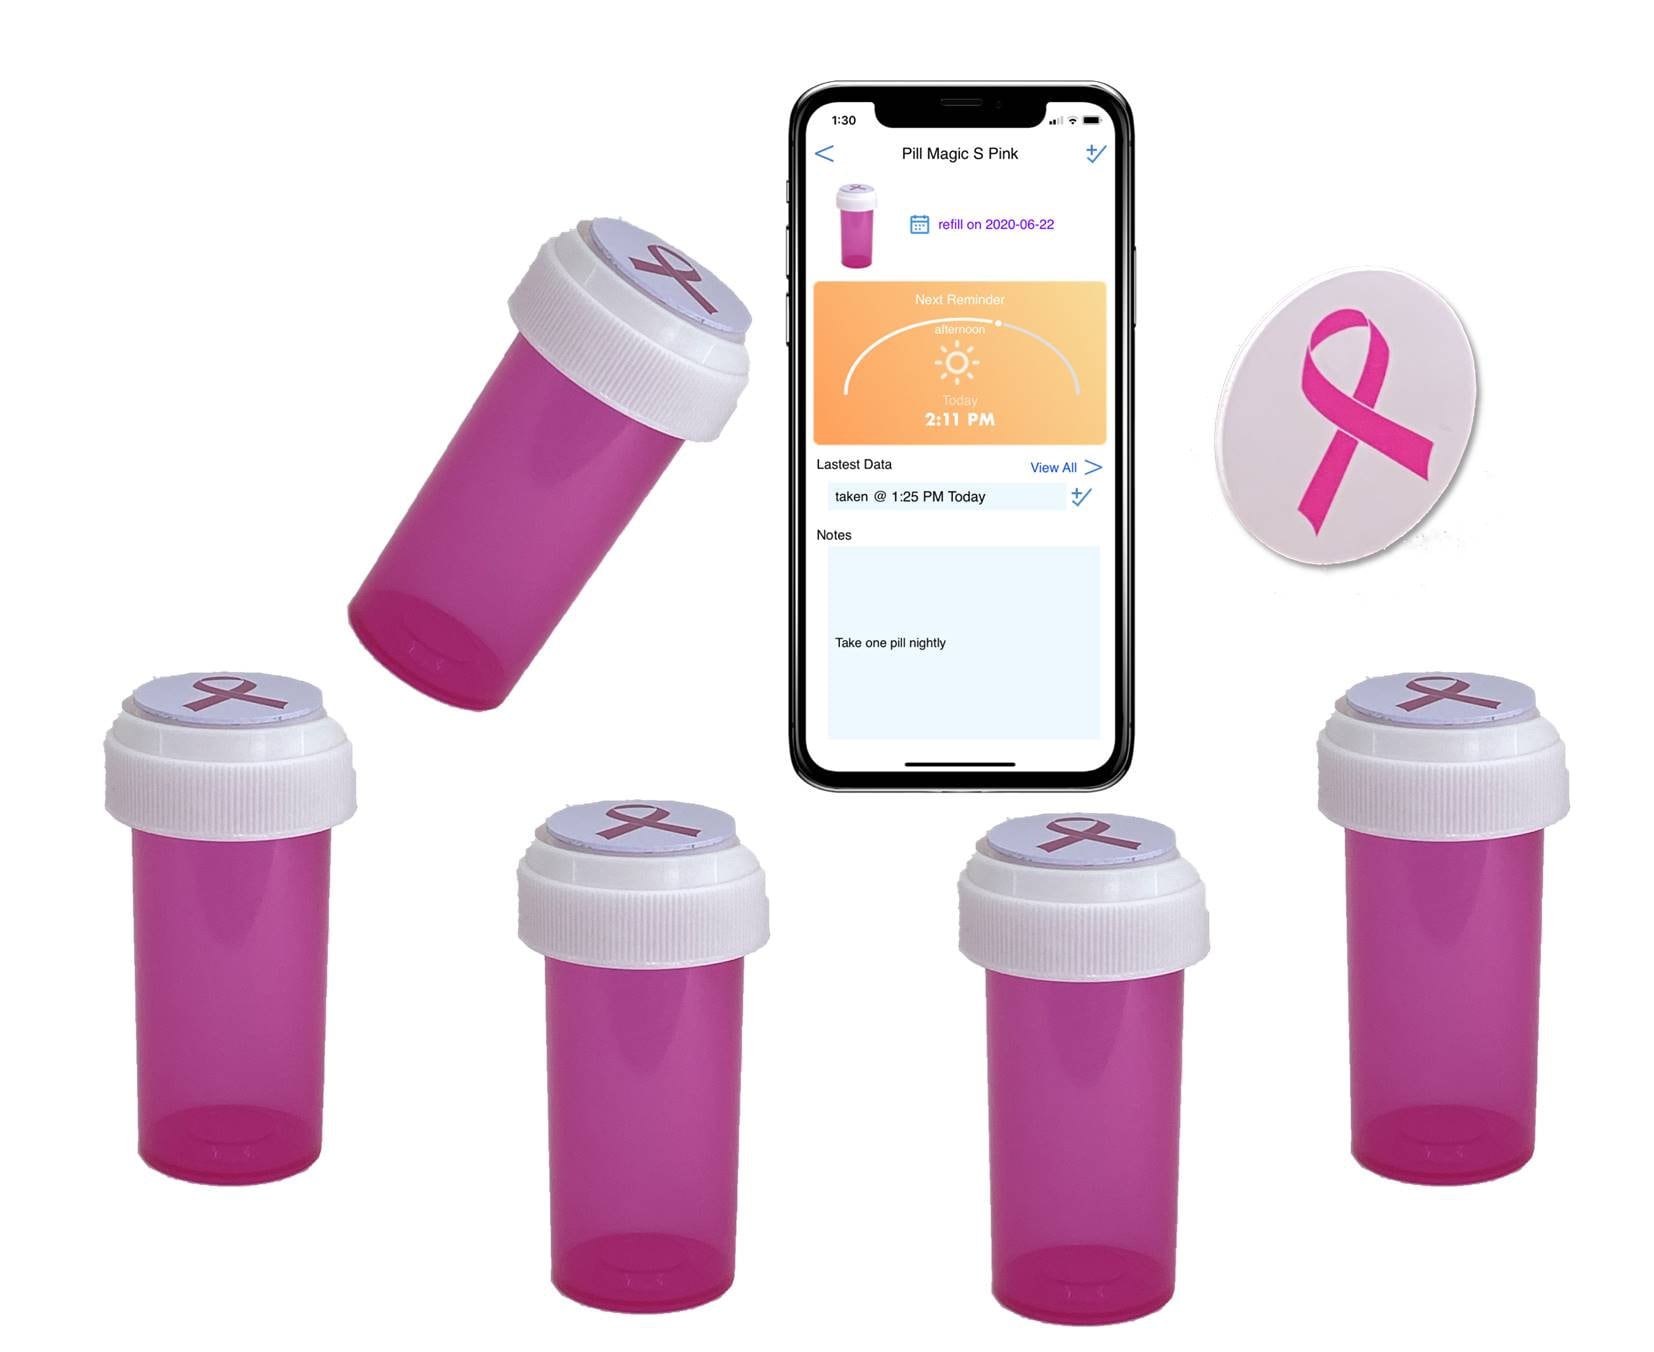  Jini Pill Magic S Smart Pill Bottle- Instantly Set Pill  Reminder, Record Pill Taken & Location by Just Tapping The Logo with Your  Phone (Pack of 6: 2 Amber, 2 Blue